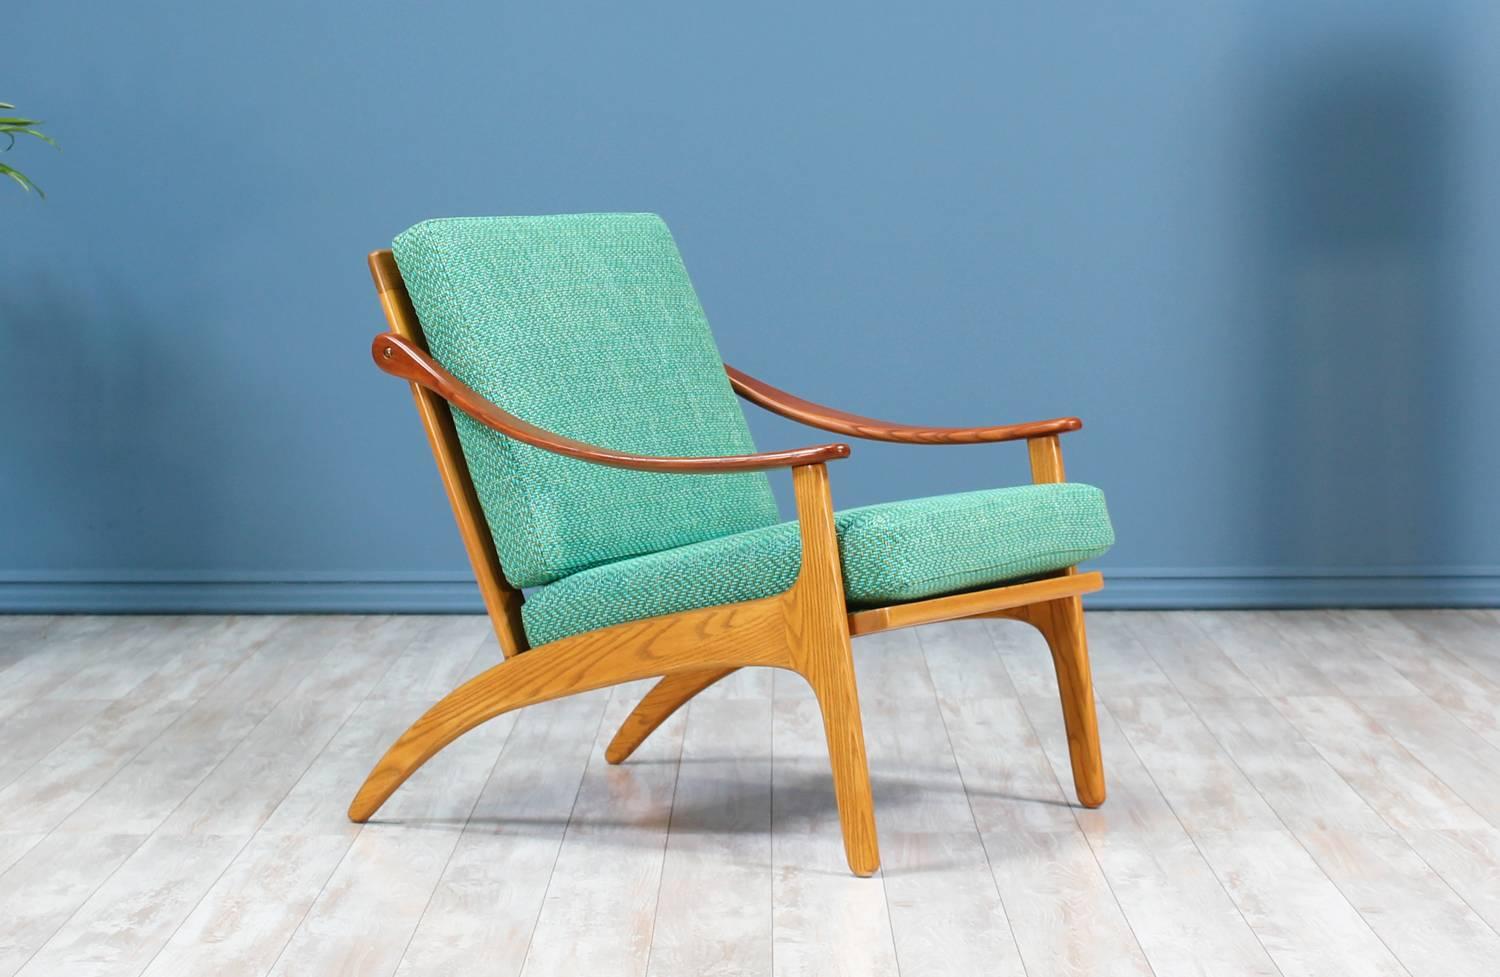 Lounge chair designed by Danish furniture designer, Arne Hovmand-Olsen, for Mogens Kold in Denmark circa 1950’s. Featuring an oak wood frame with teak accents including the curvilinear arm rests and the five vertical spindles adorning the back.